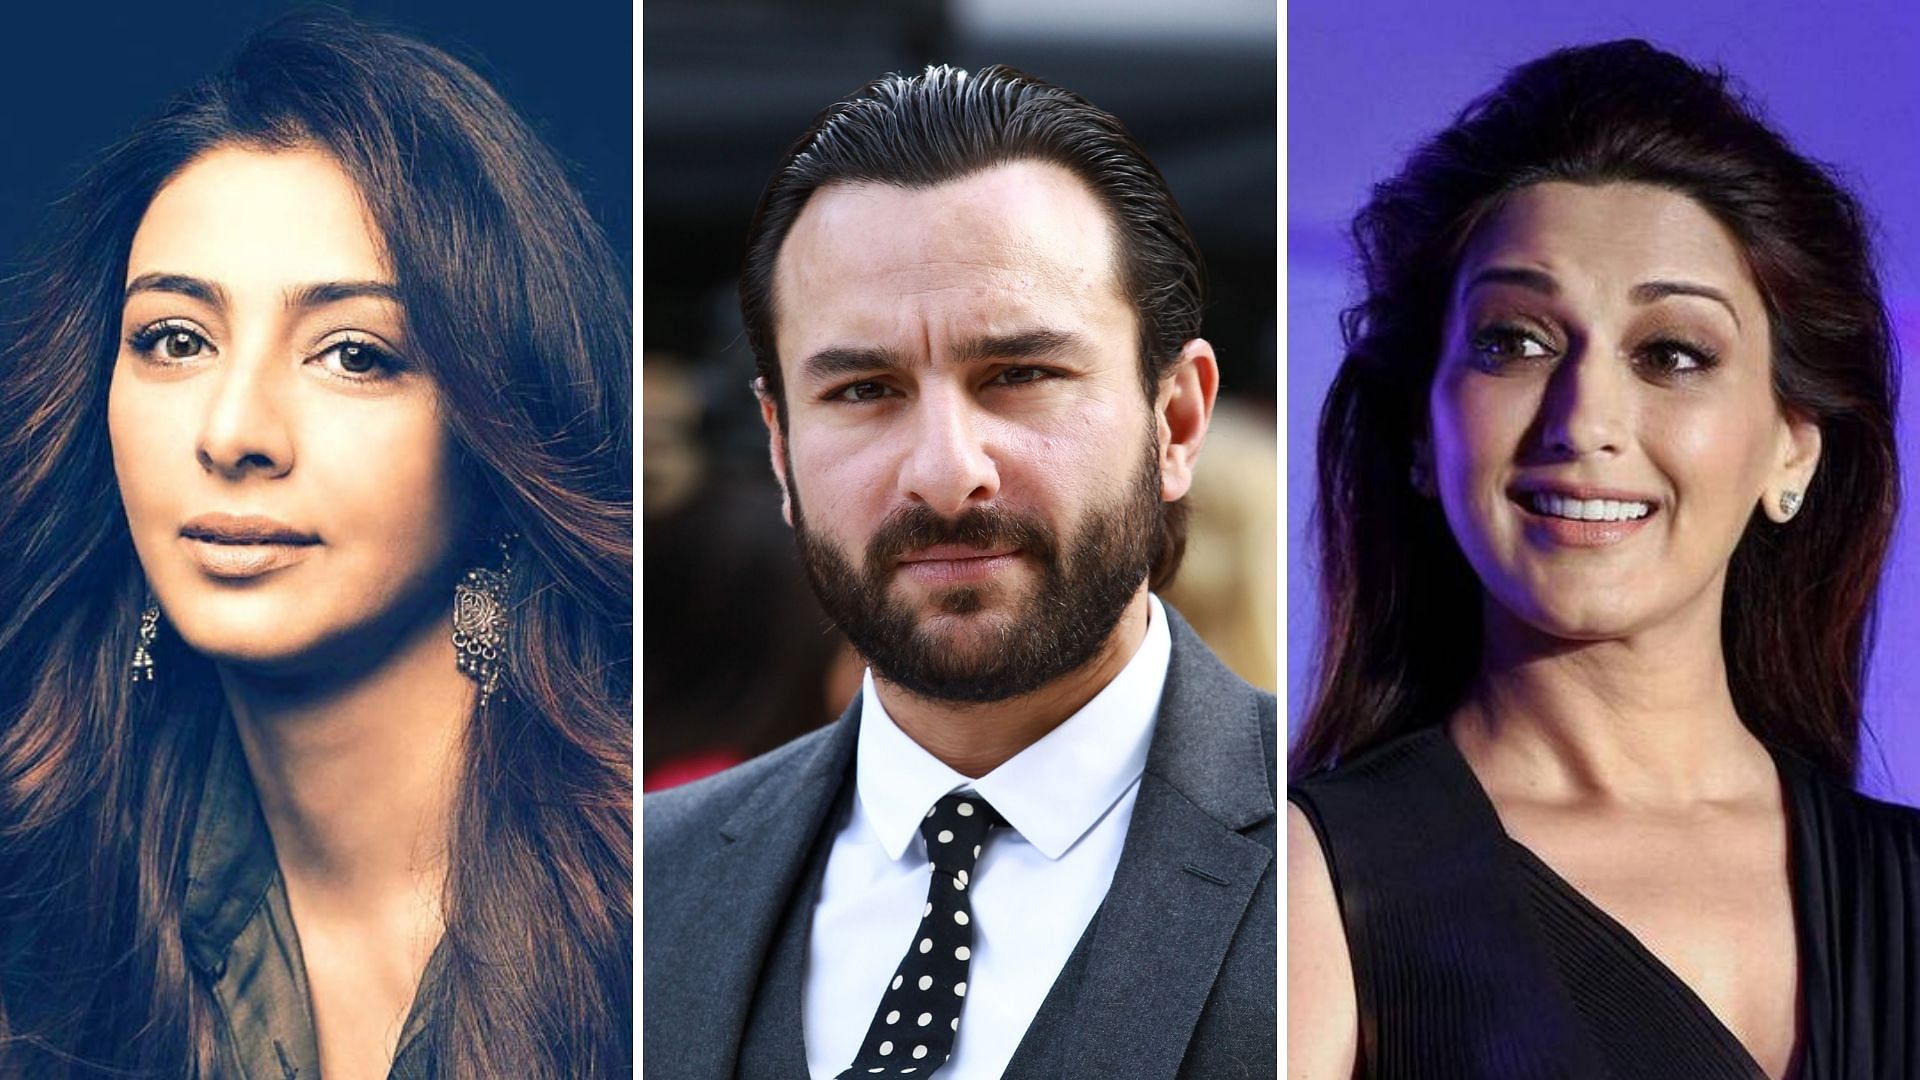 A bench of the Rajasthan High Court, on Monday, 20 May, issued fresh notices to actors Saif Ali Khan, Sonali Bendre, Neelam Kothari and Tabu in the 1998 black buck poaching case.